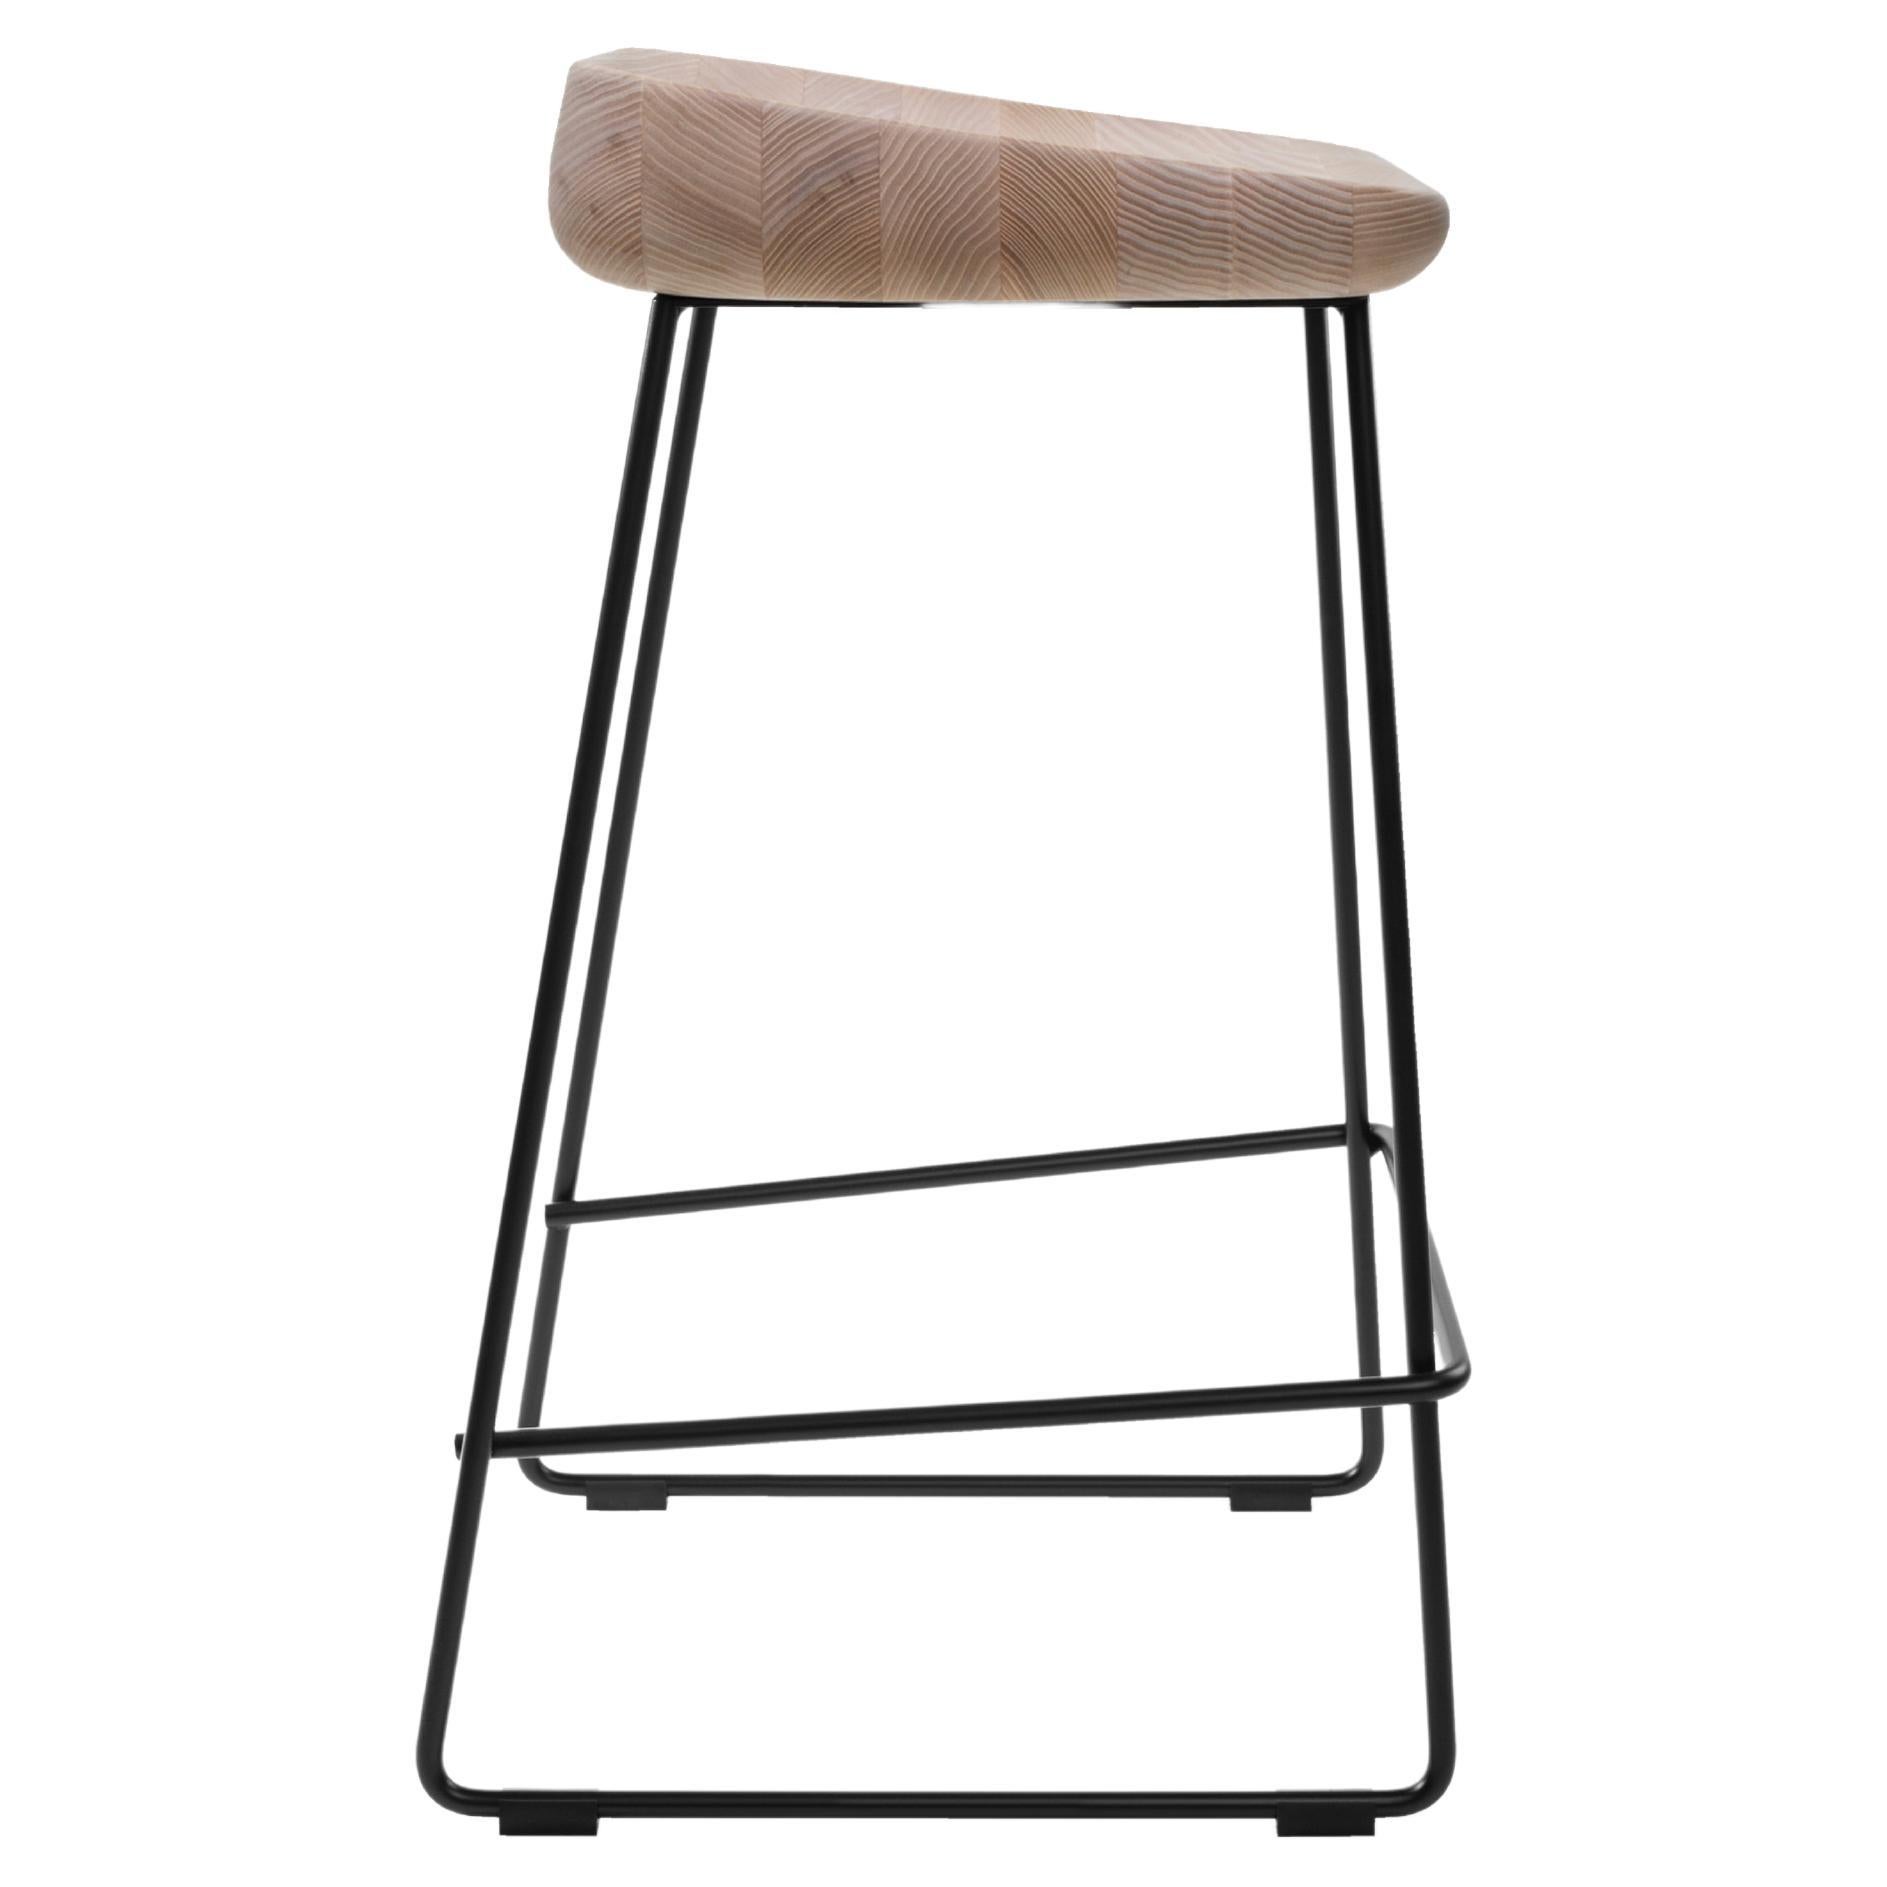 Counter Stool Wave with Ash Solid Wood Seat and Steel Frame